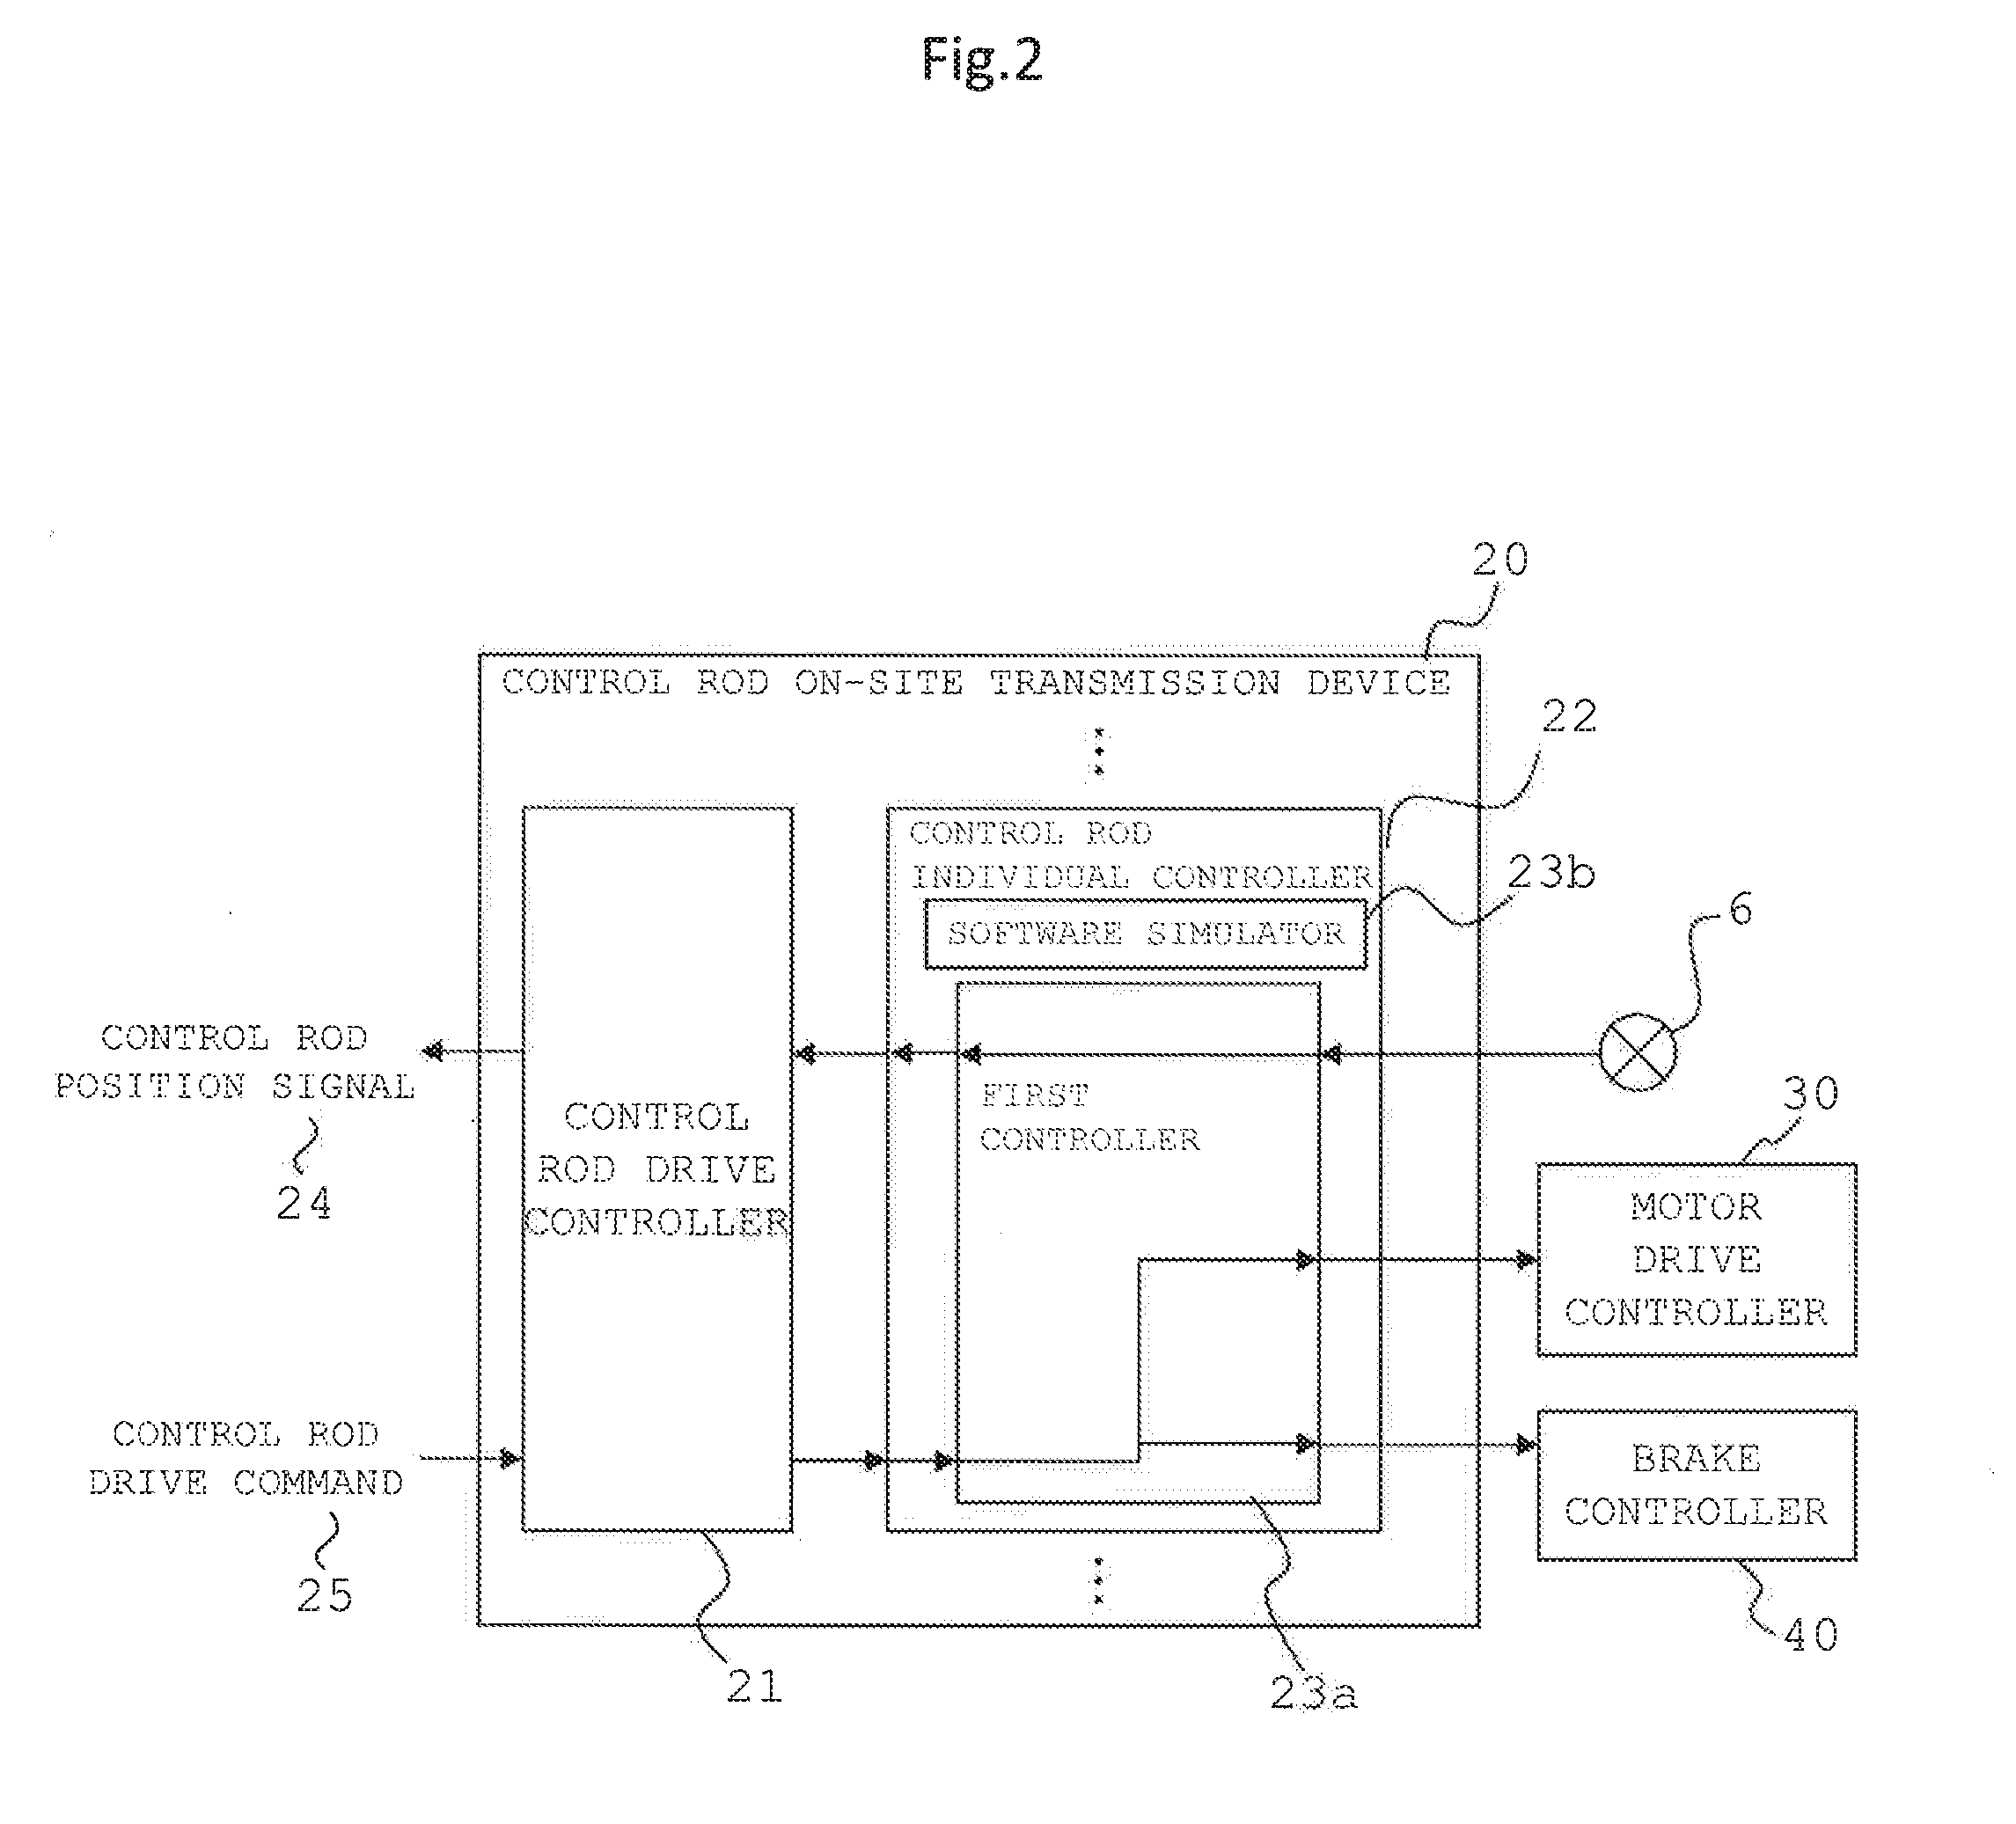 Rod Control and Information System, Control Rod Individual Controller, and Test Method for Rod Control and Information System